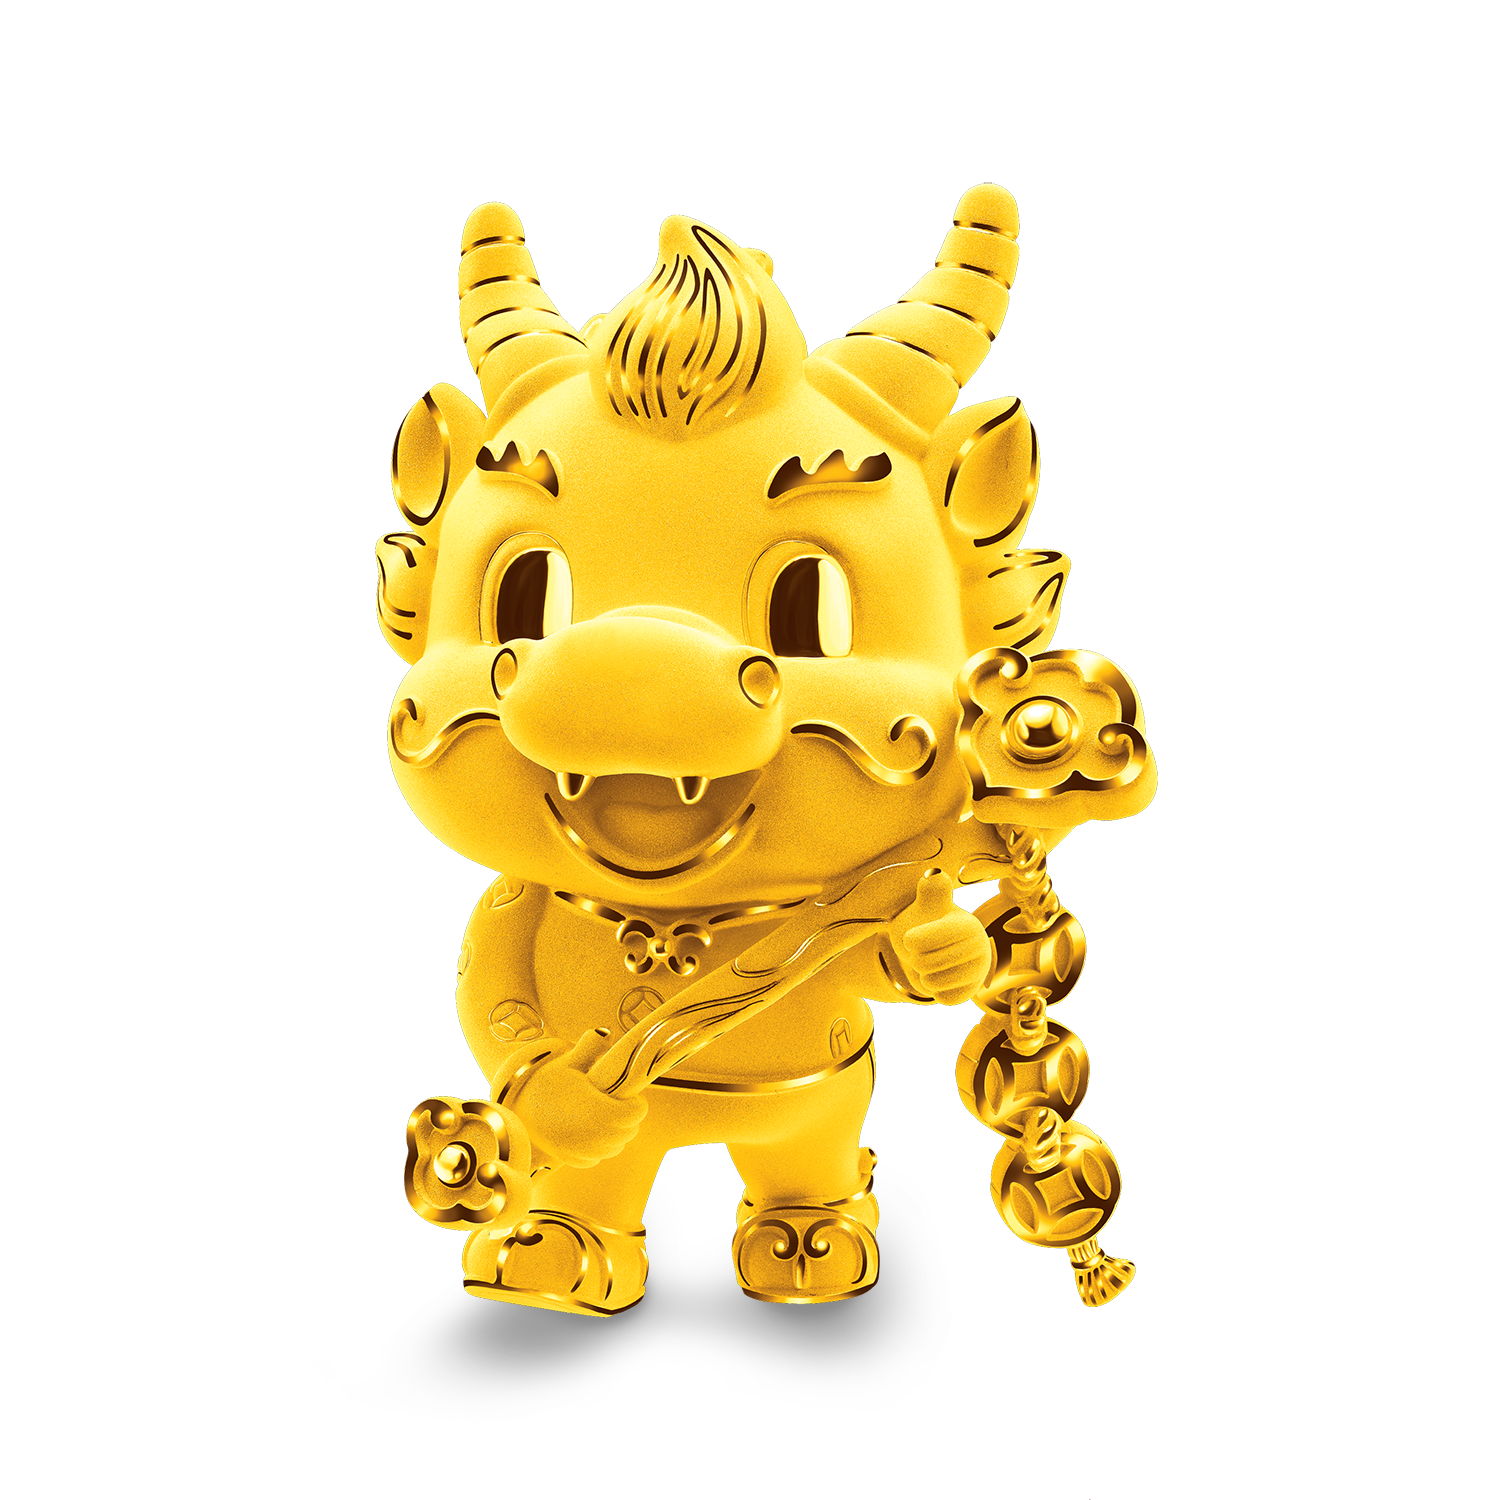 Fortune Dragon Collection "Dragon of Wealth" Gold Figurine